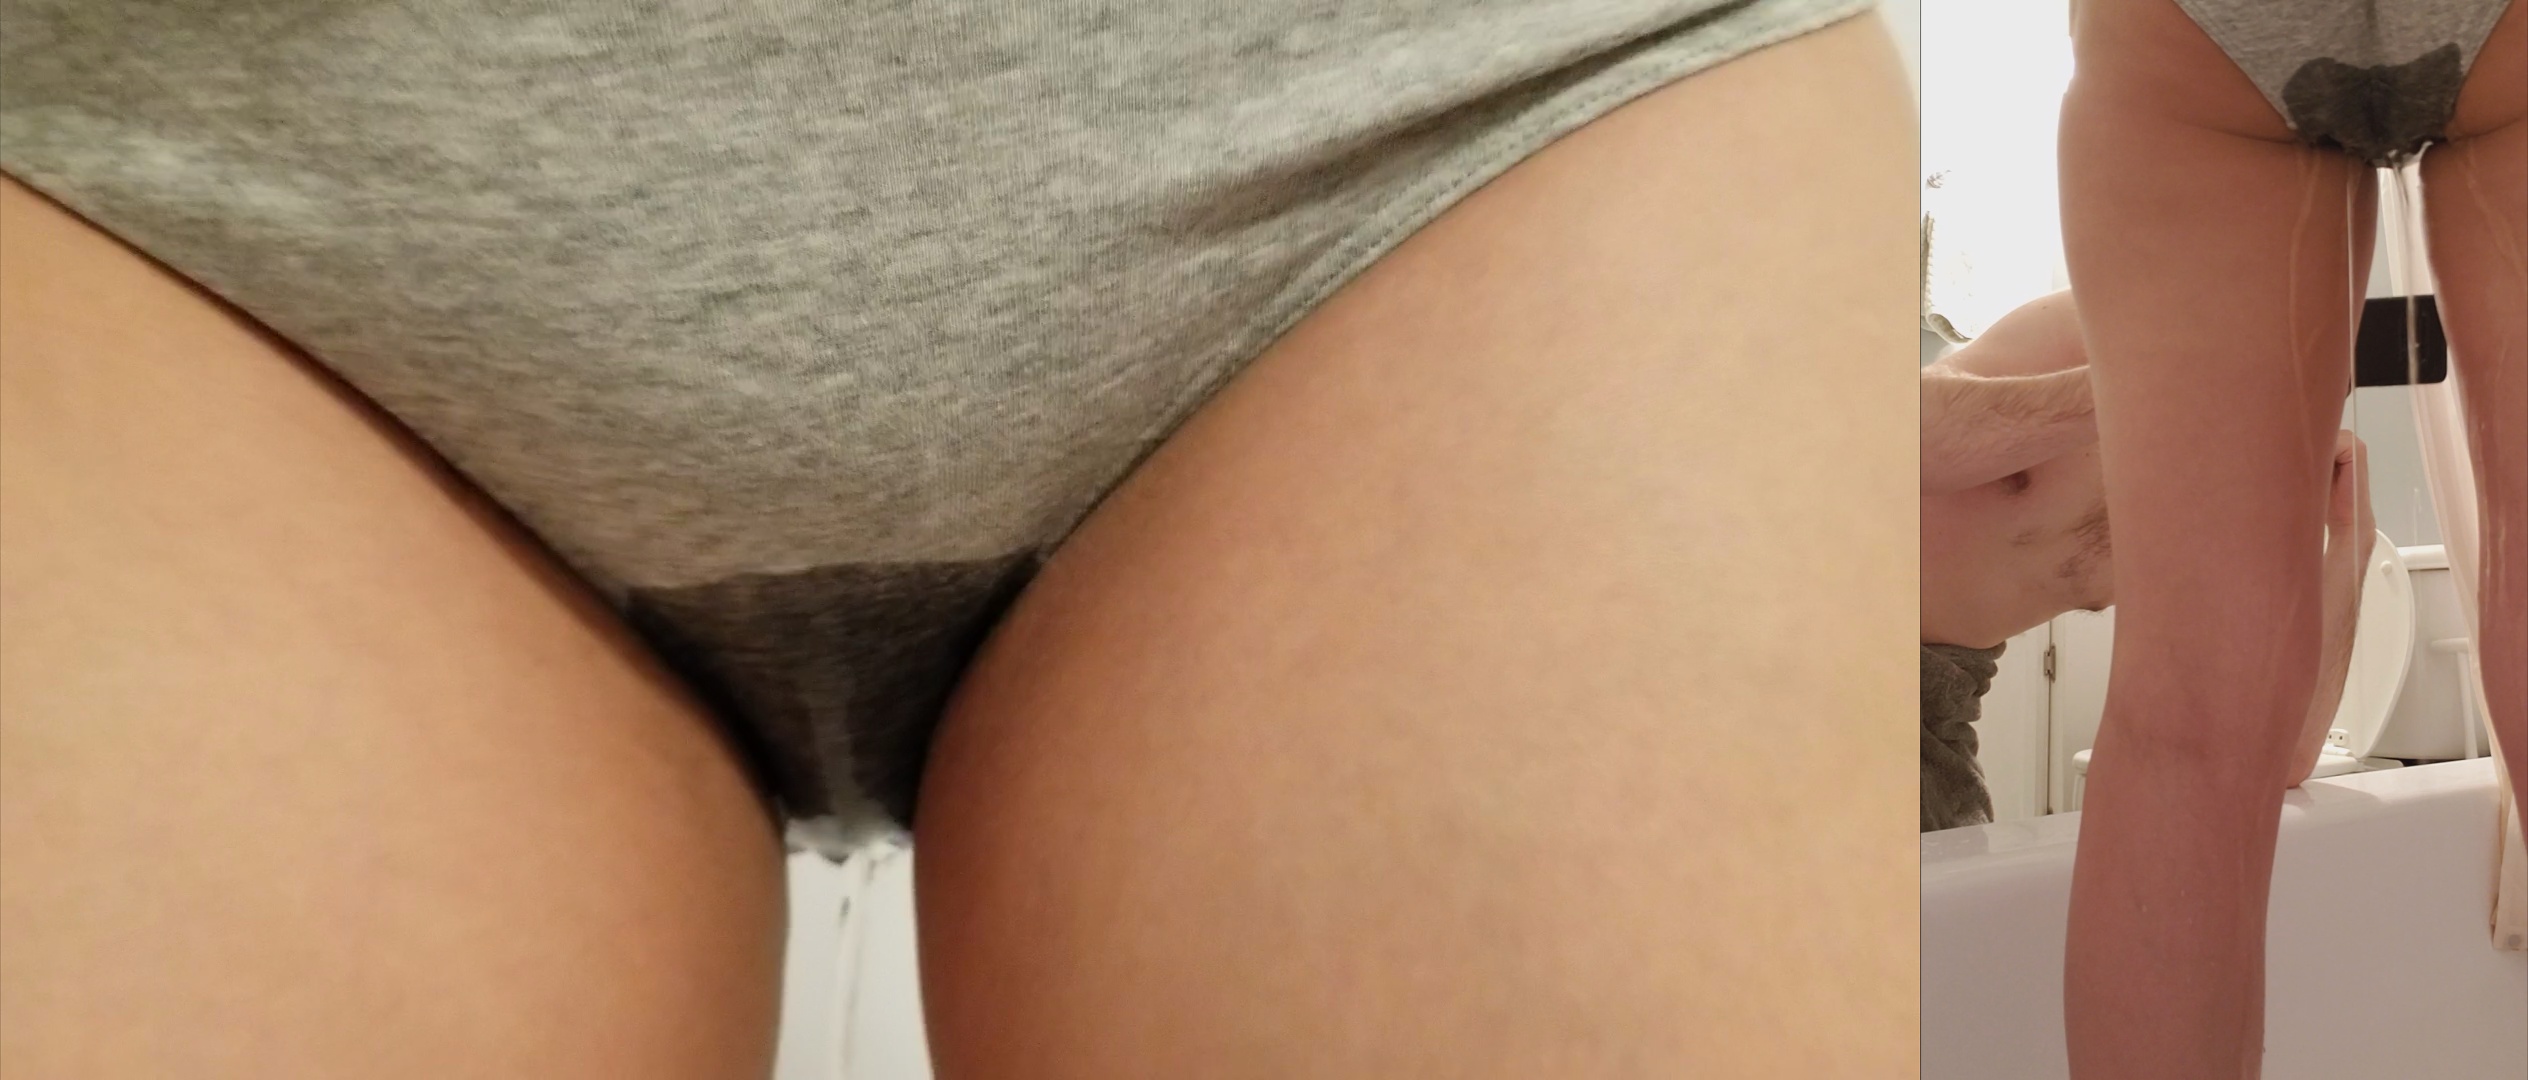 Girls Pissing Pants Wife held it as long as… ThisVid